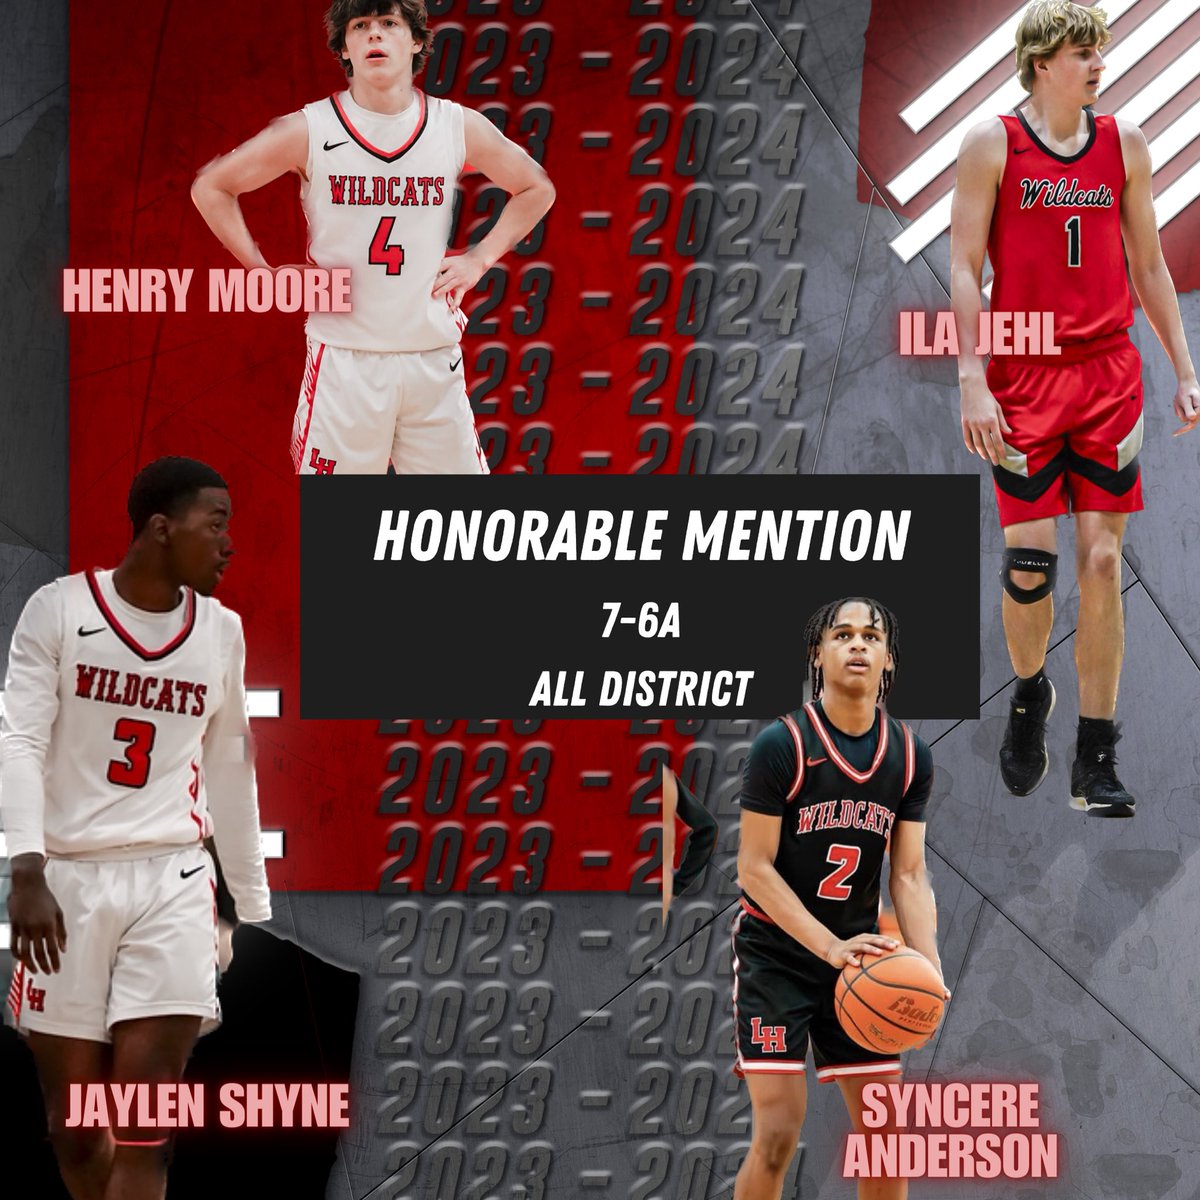 Congrats to @Henrymoore214 @jaylen_shyne2 @ila_jehl @_Syncere1 Honorable Mention! 🏀🐾 #Family